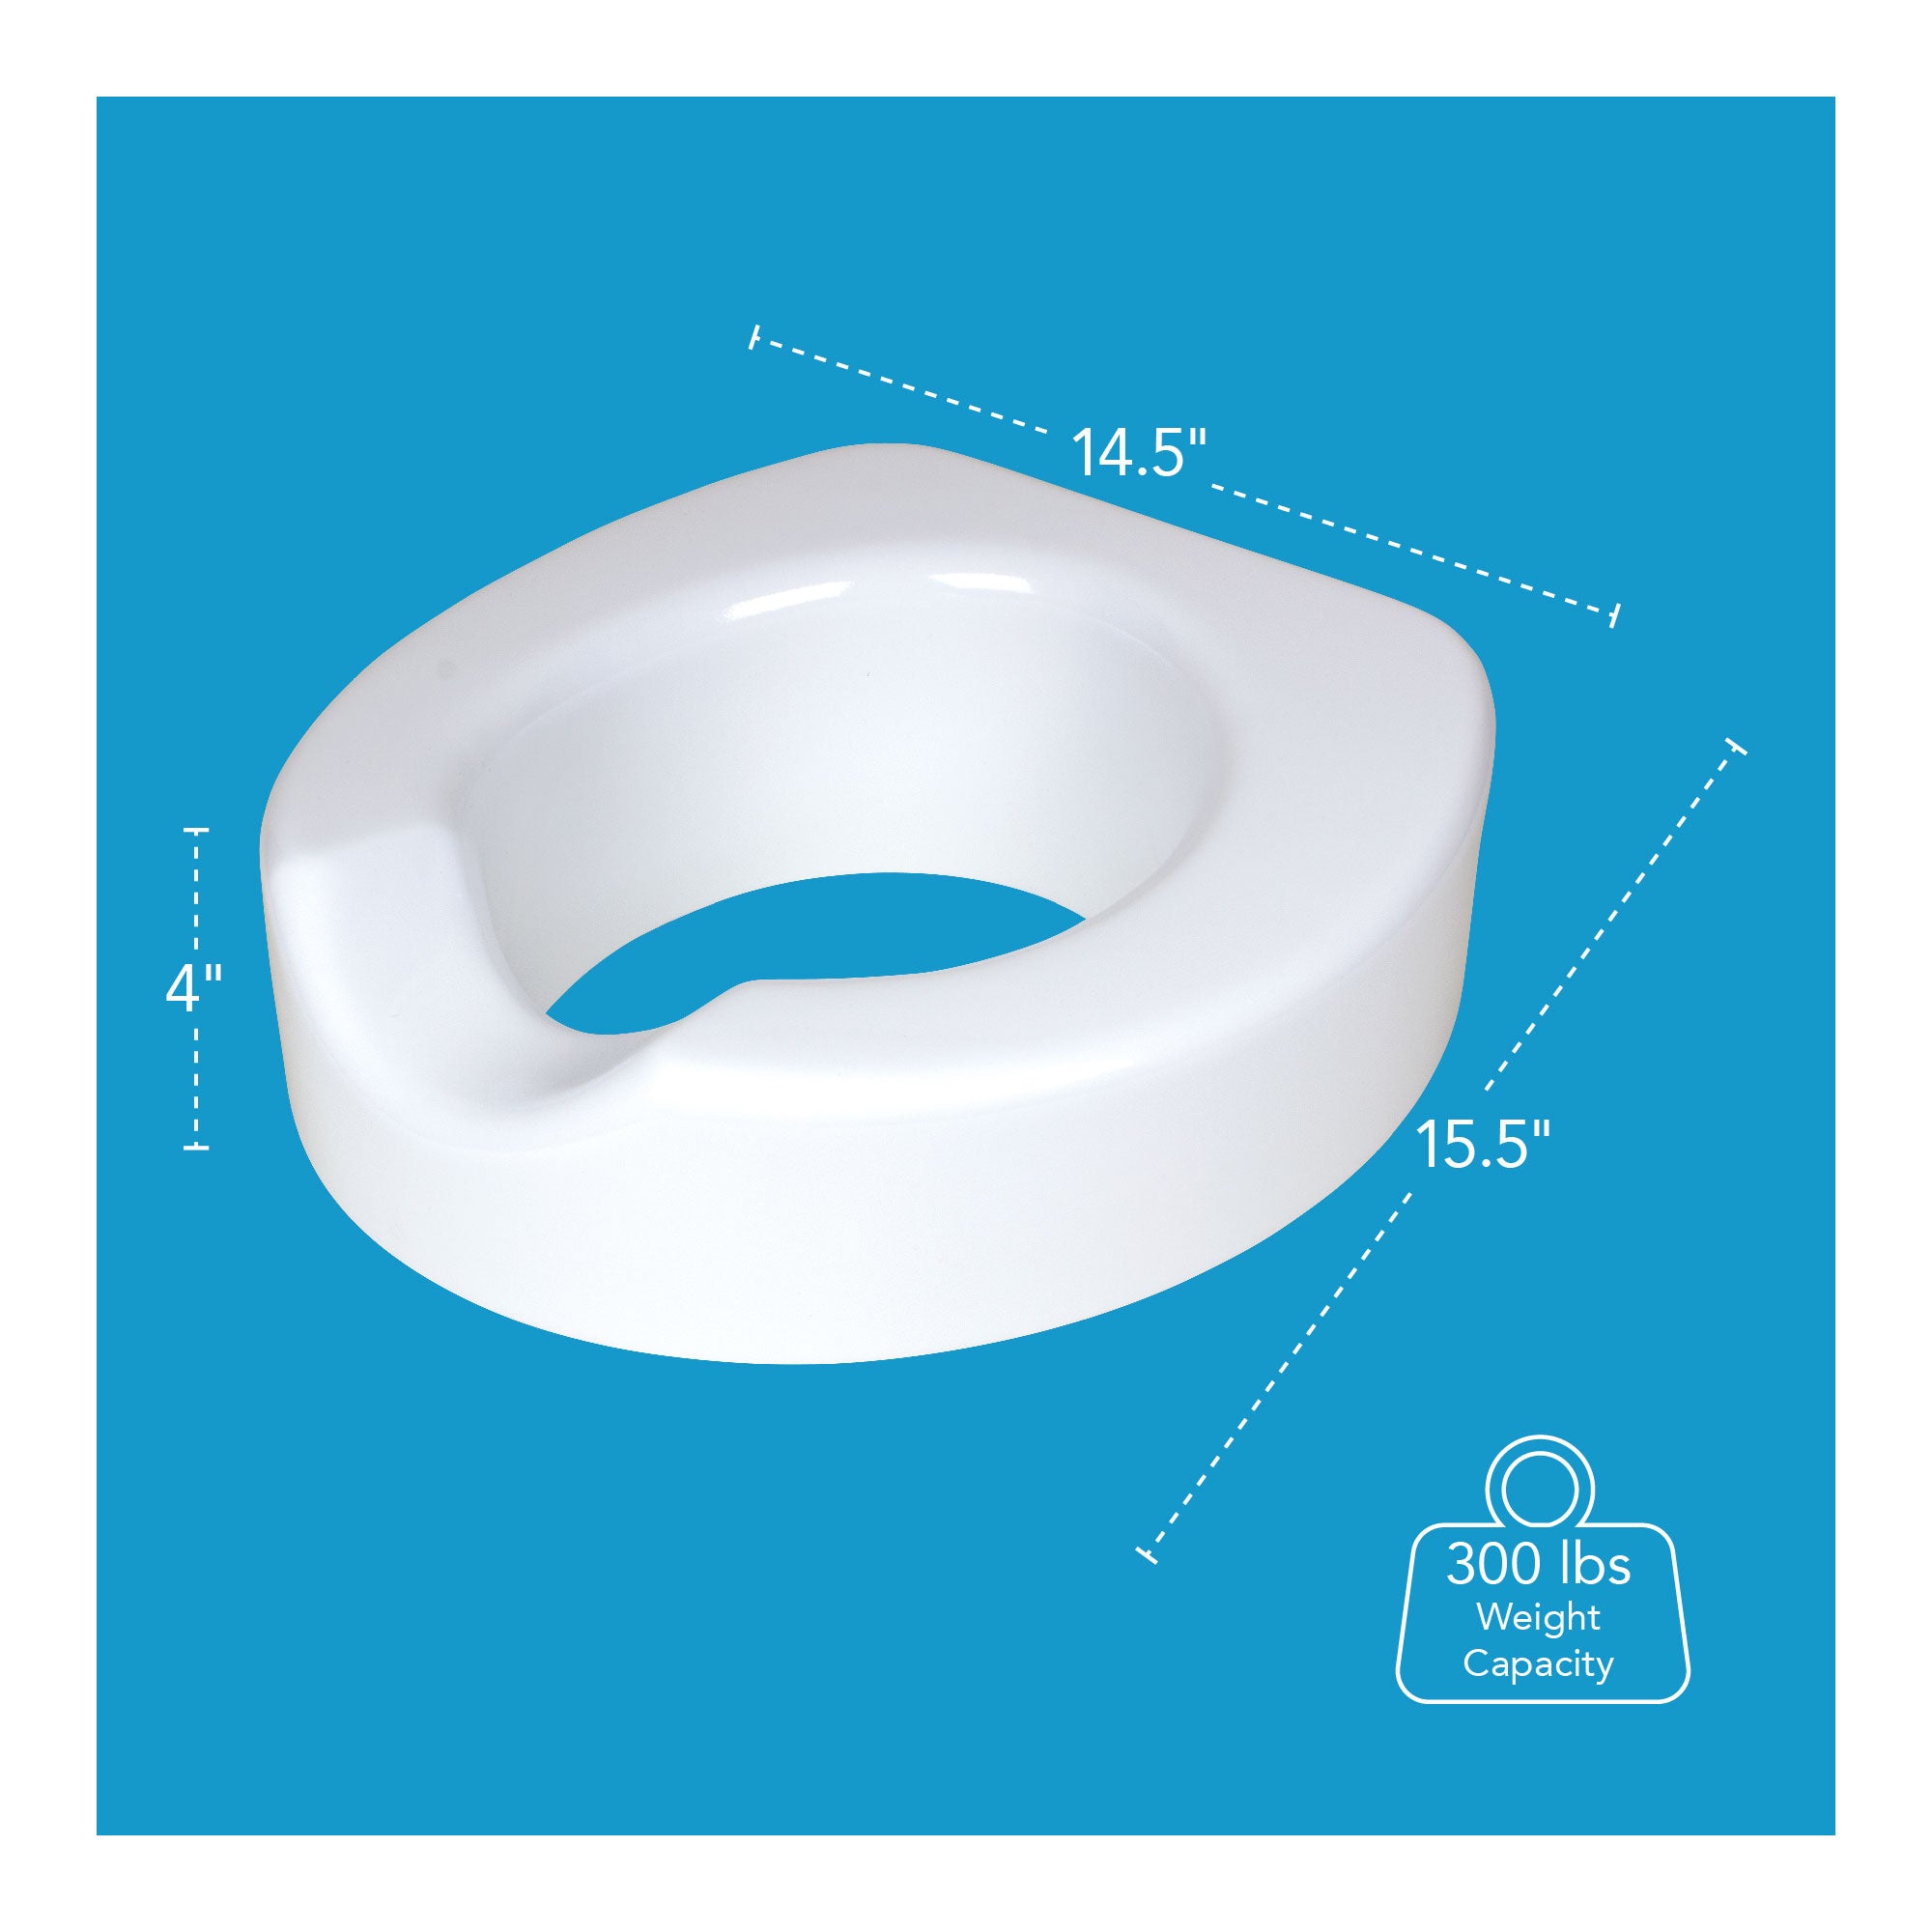 A raised toilet with its dimensions outlined